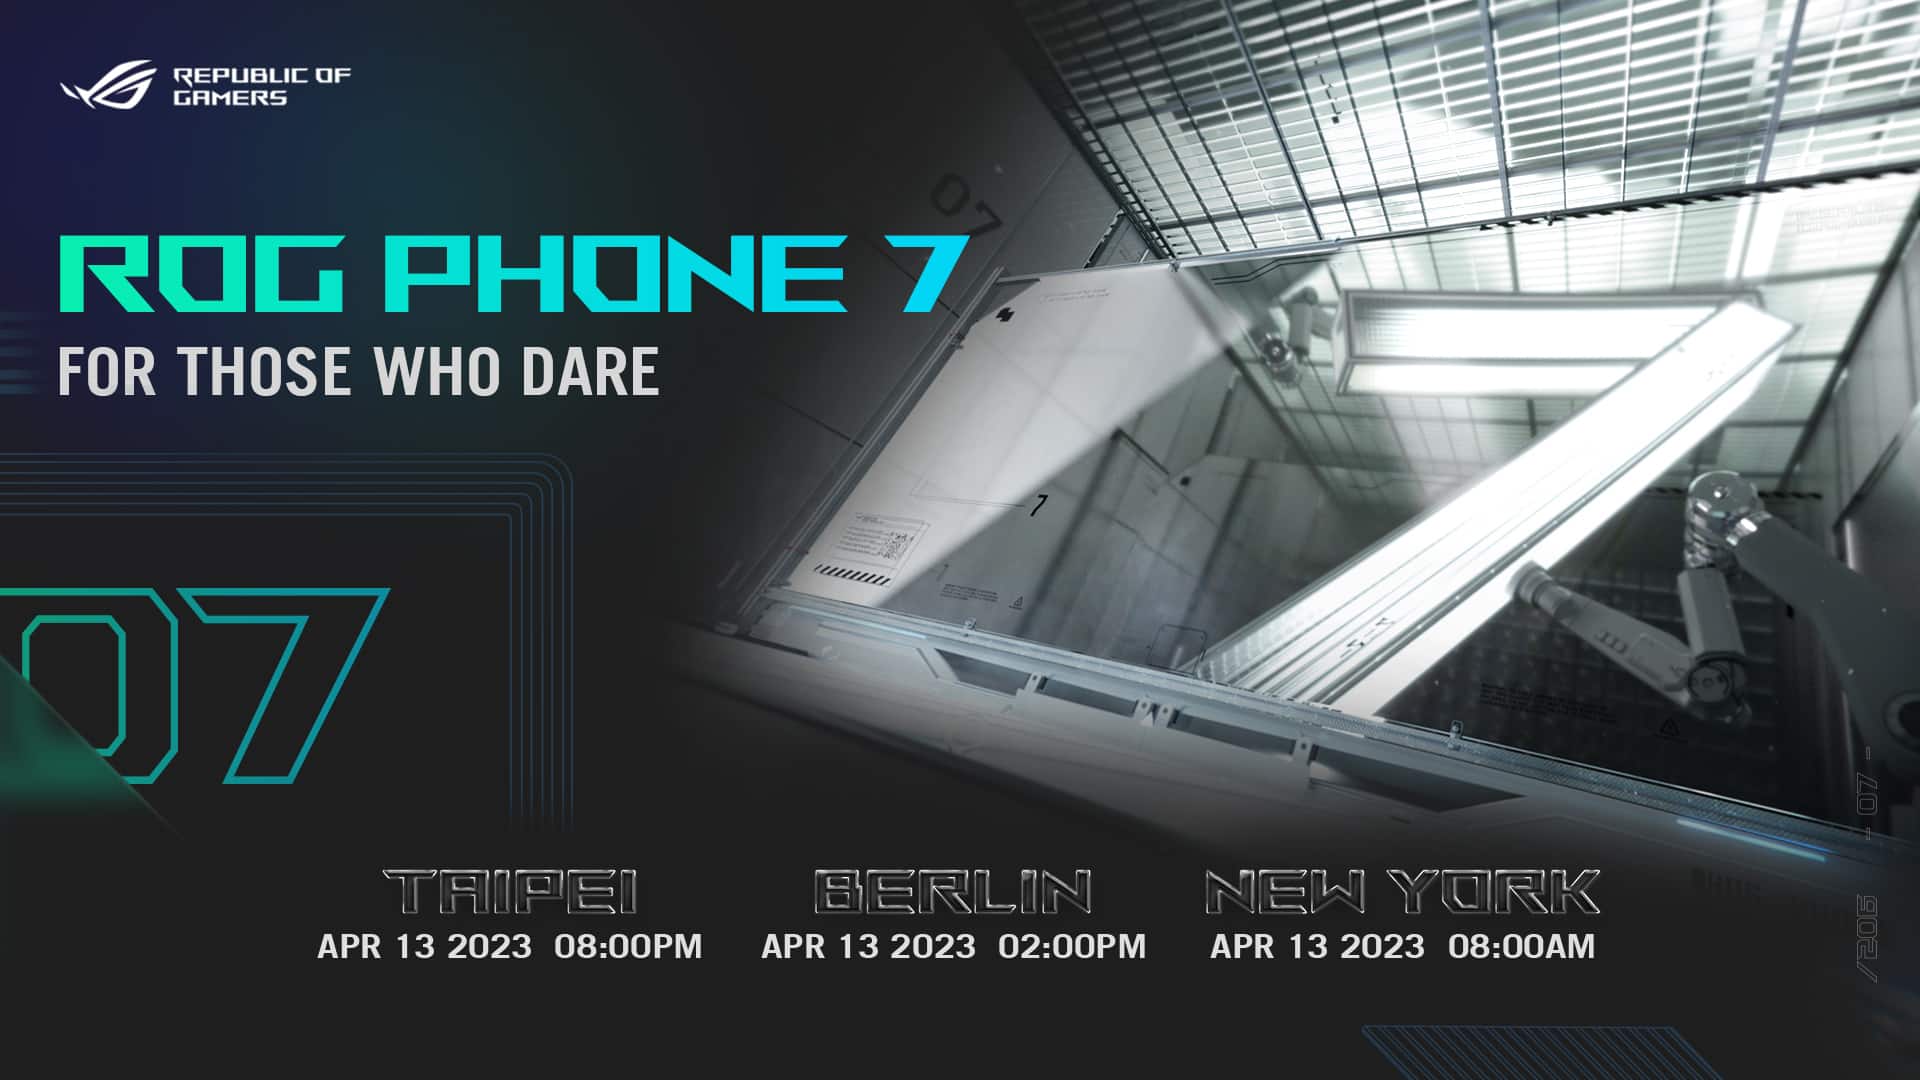 The thick gaming phone from ASUS will be introduced soon